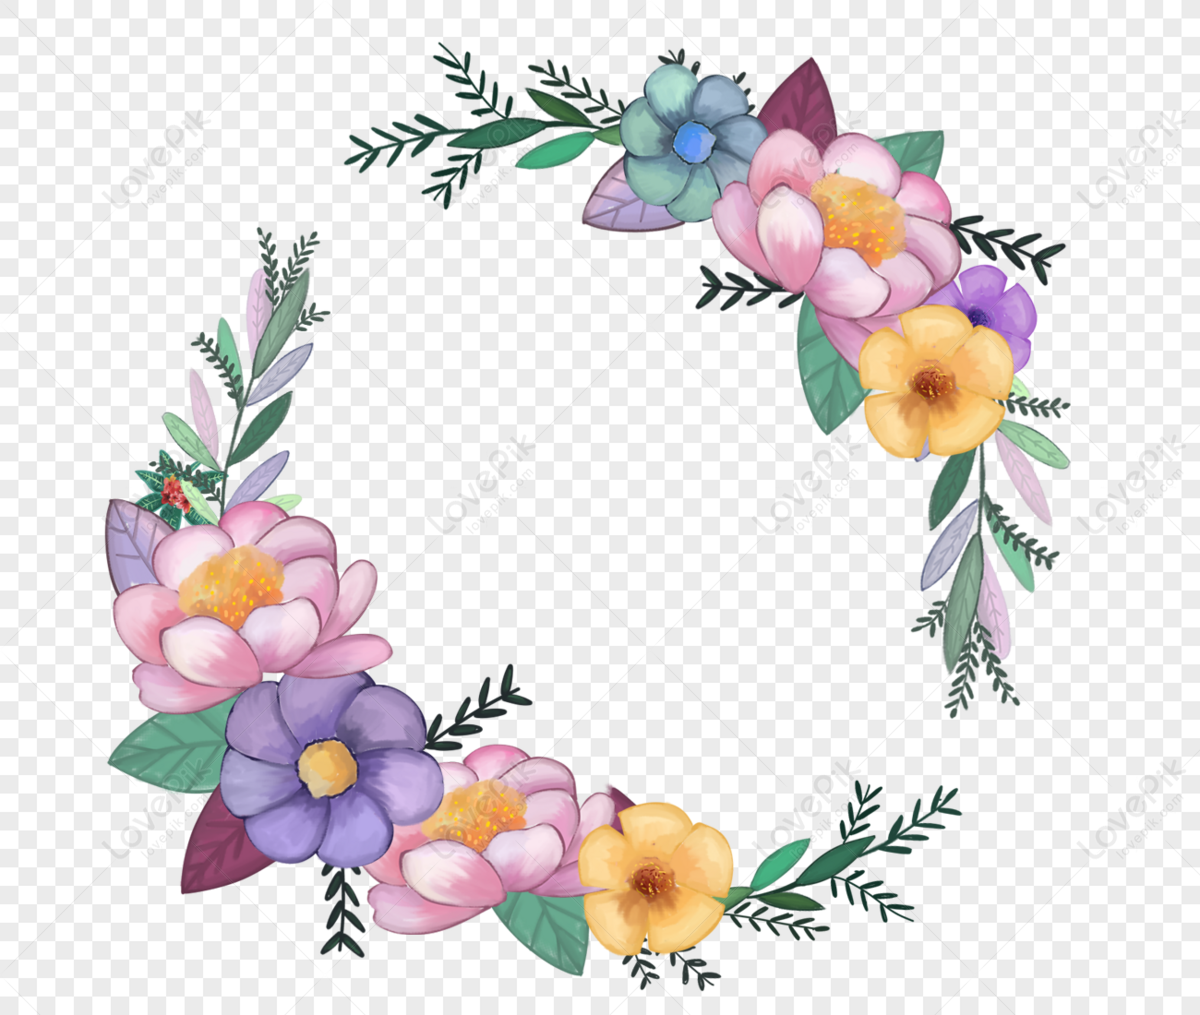 Flower Ring, Material, Flower Illustrations, Flowerl PNG Picture And